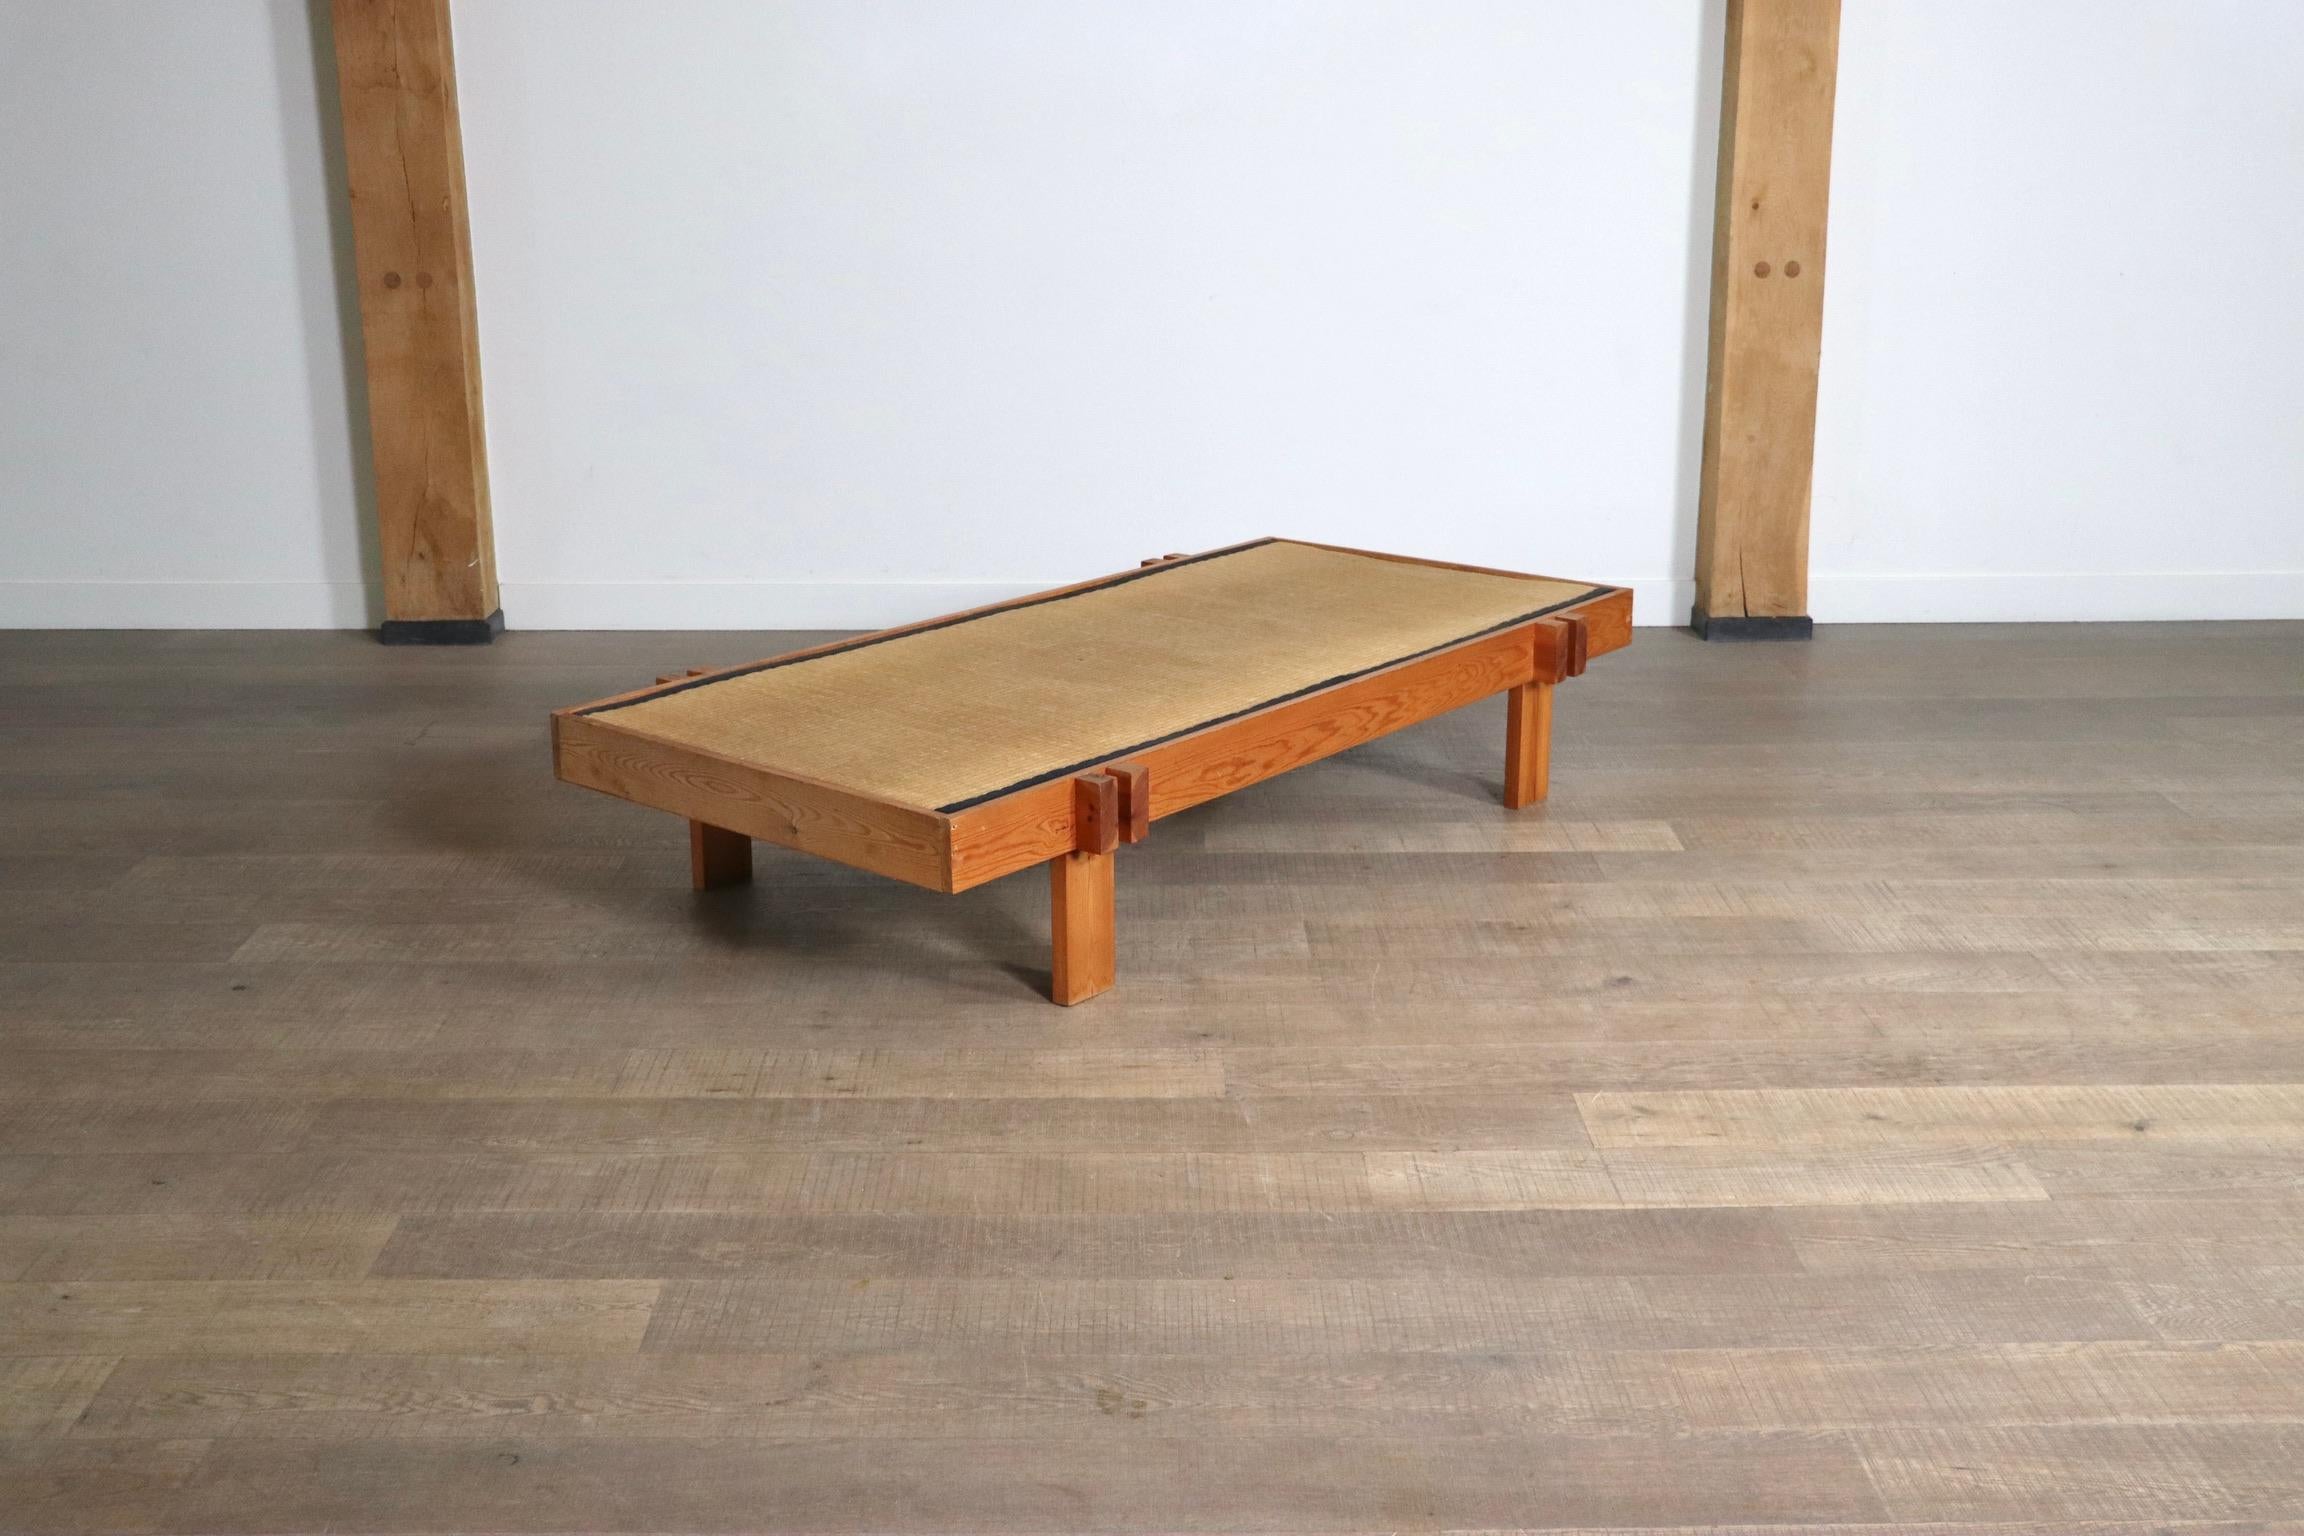 Japonisme Midcentury Japanese Coffee Table In Wood And Seagrass, Japan, 1960s For Sale